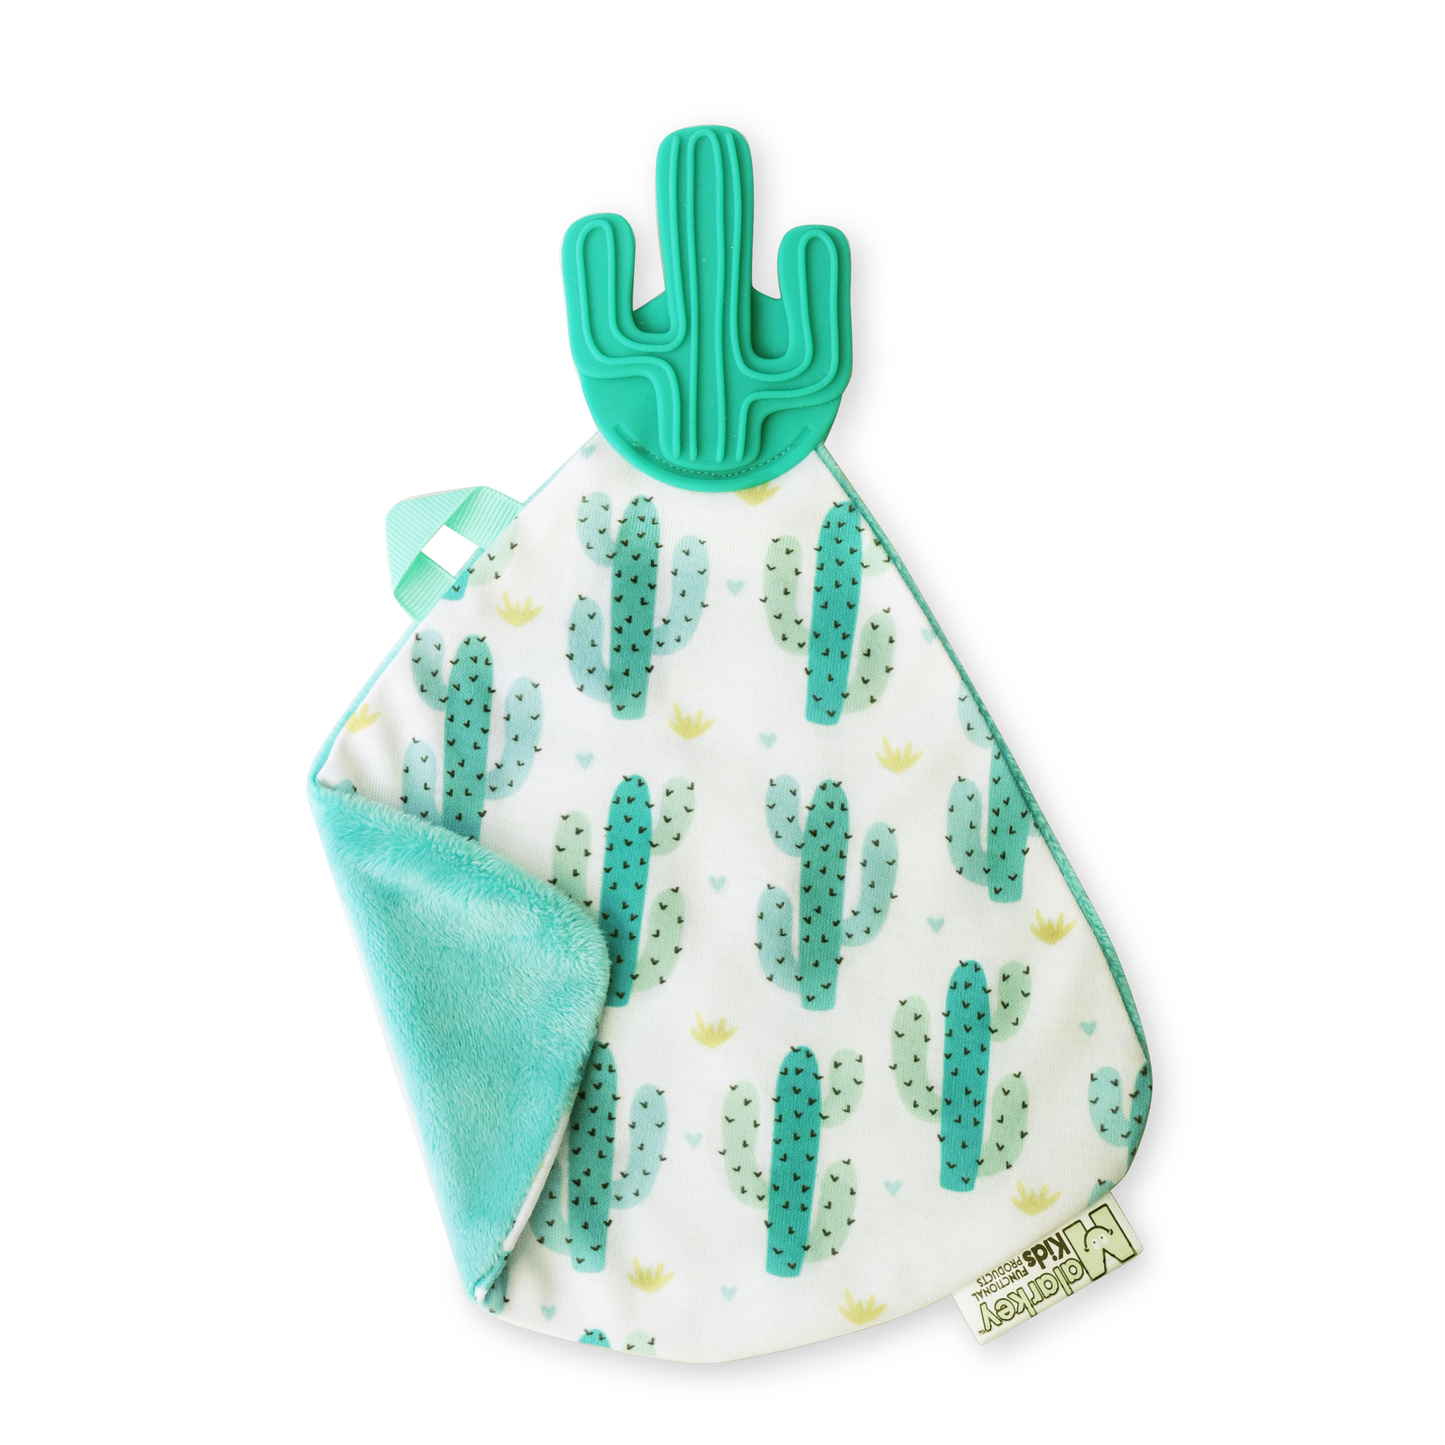 a convenient teether and cozy blanket for baby. Designed to target baby's emerging front& eye teeth as well as early molars.  The soft blanket is perfect for snuggling and absorbing drool